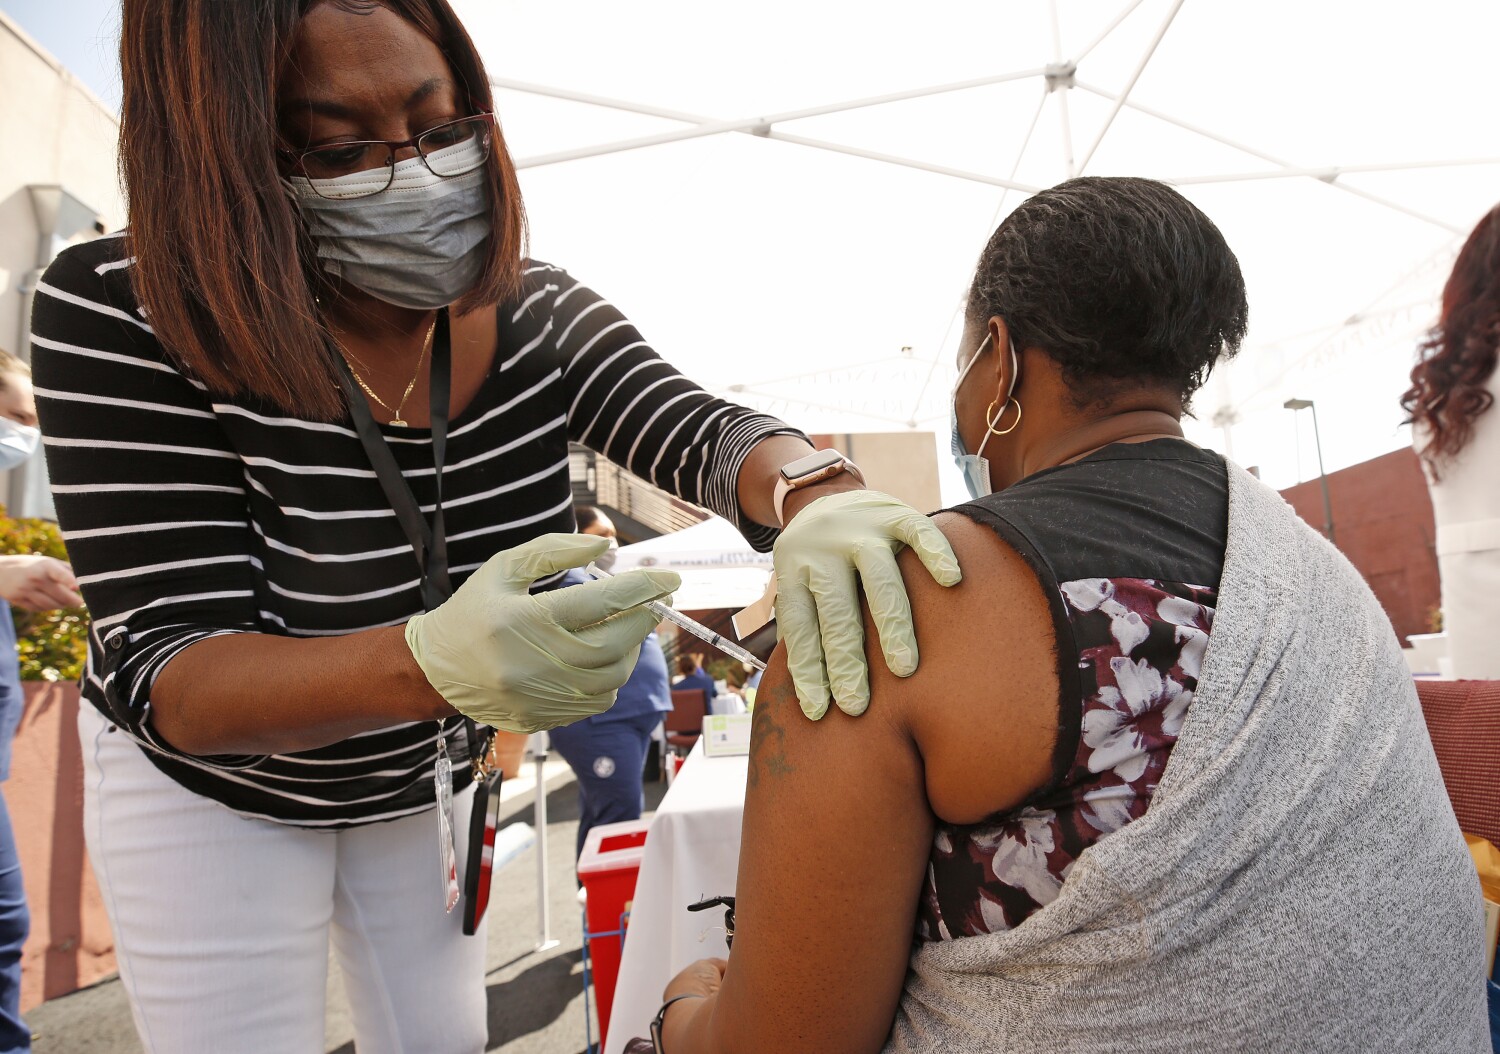 Los Angeles County reports 7 coronavirus deaths; officials urge caution during holiday weekend 